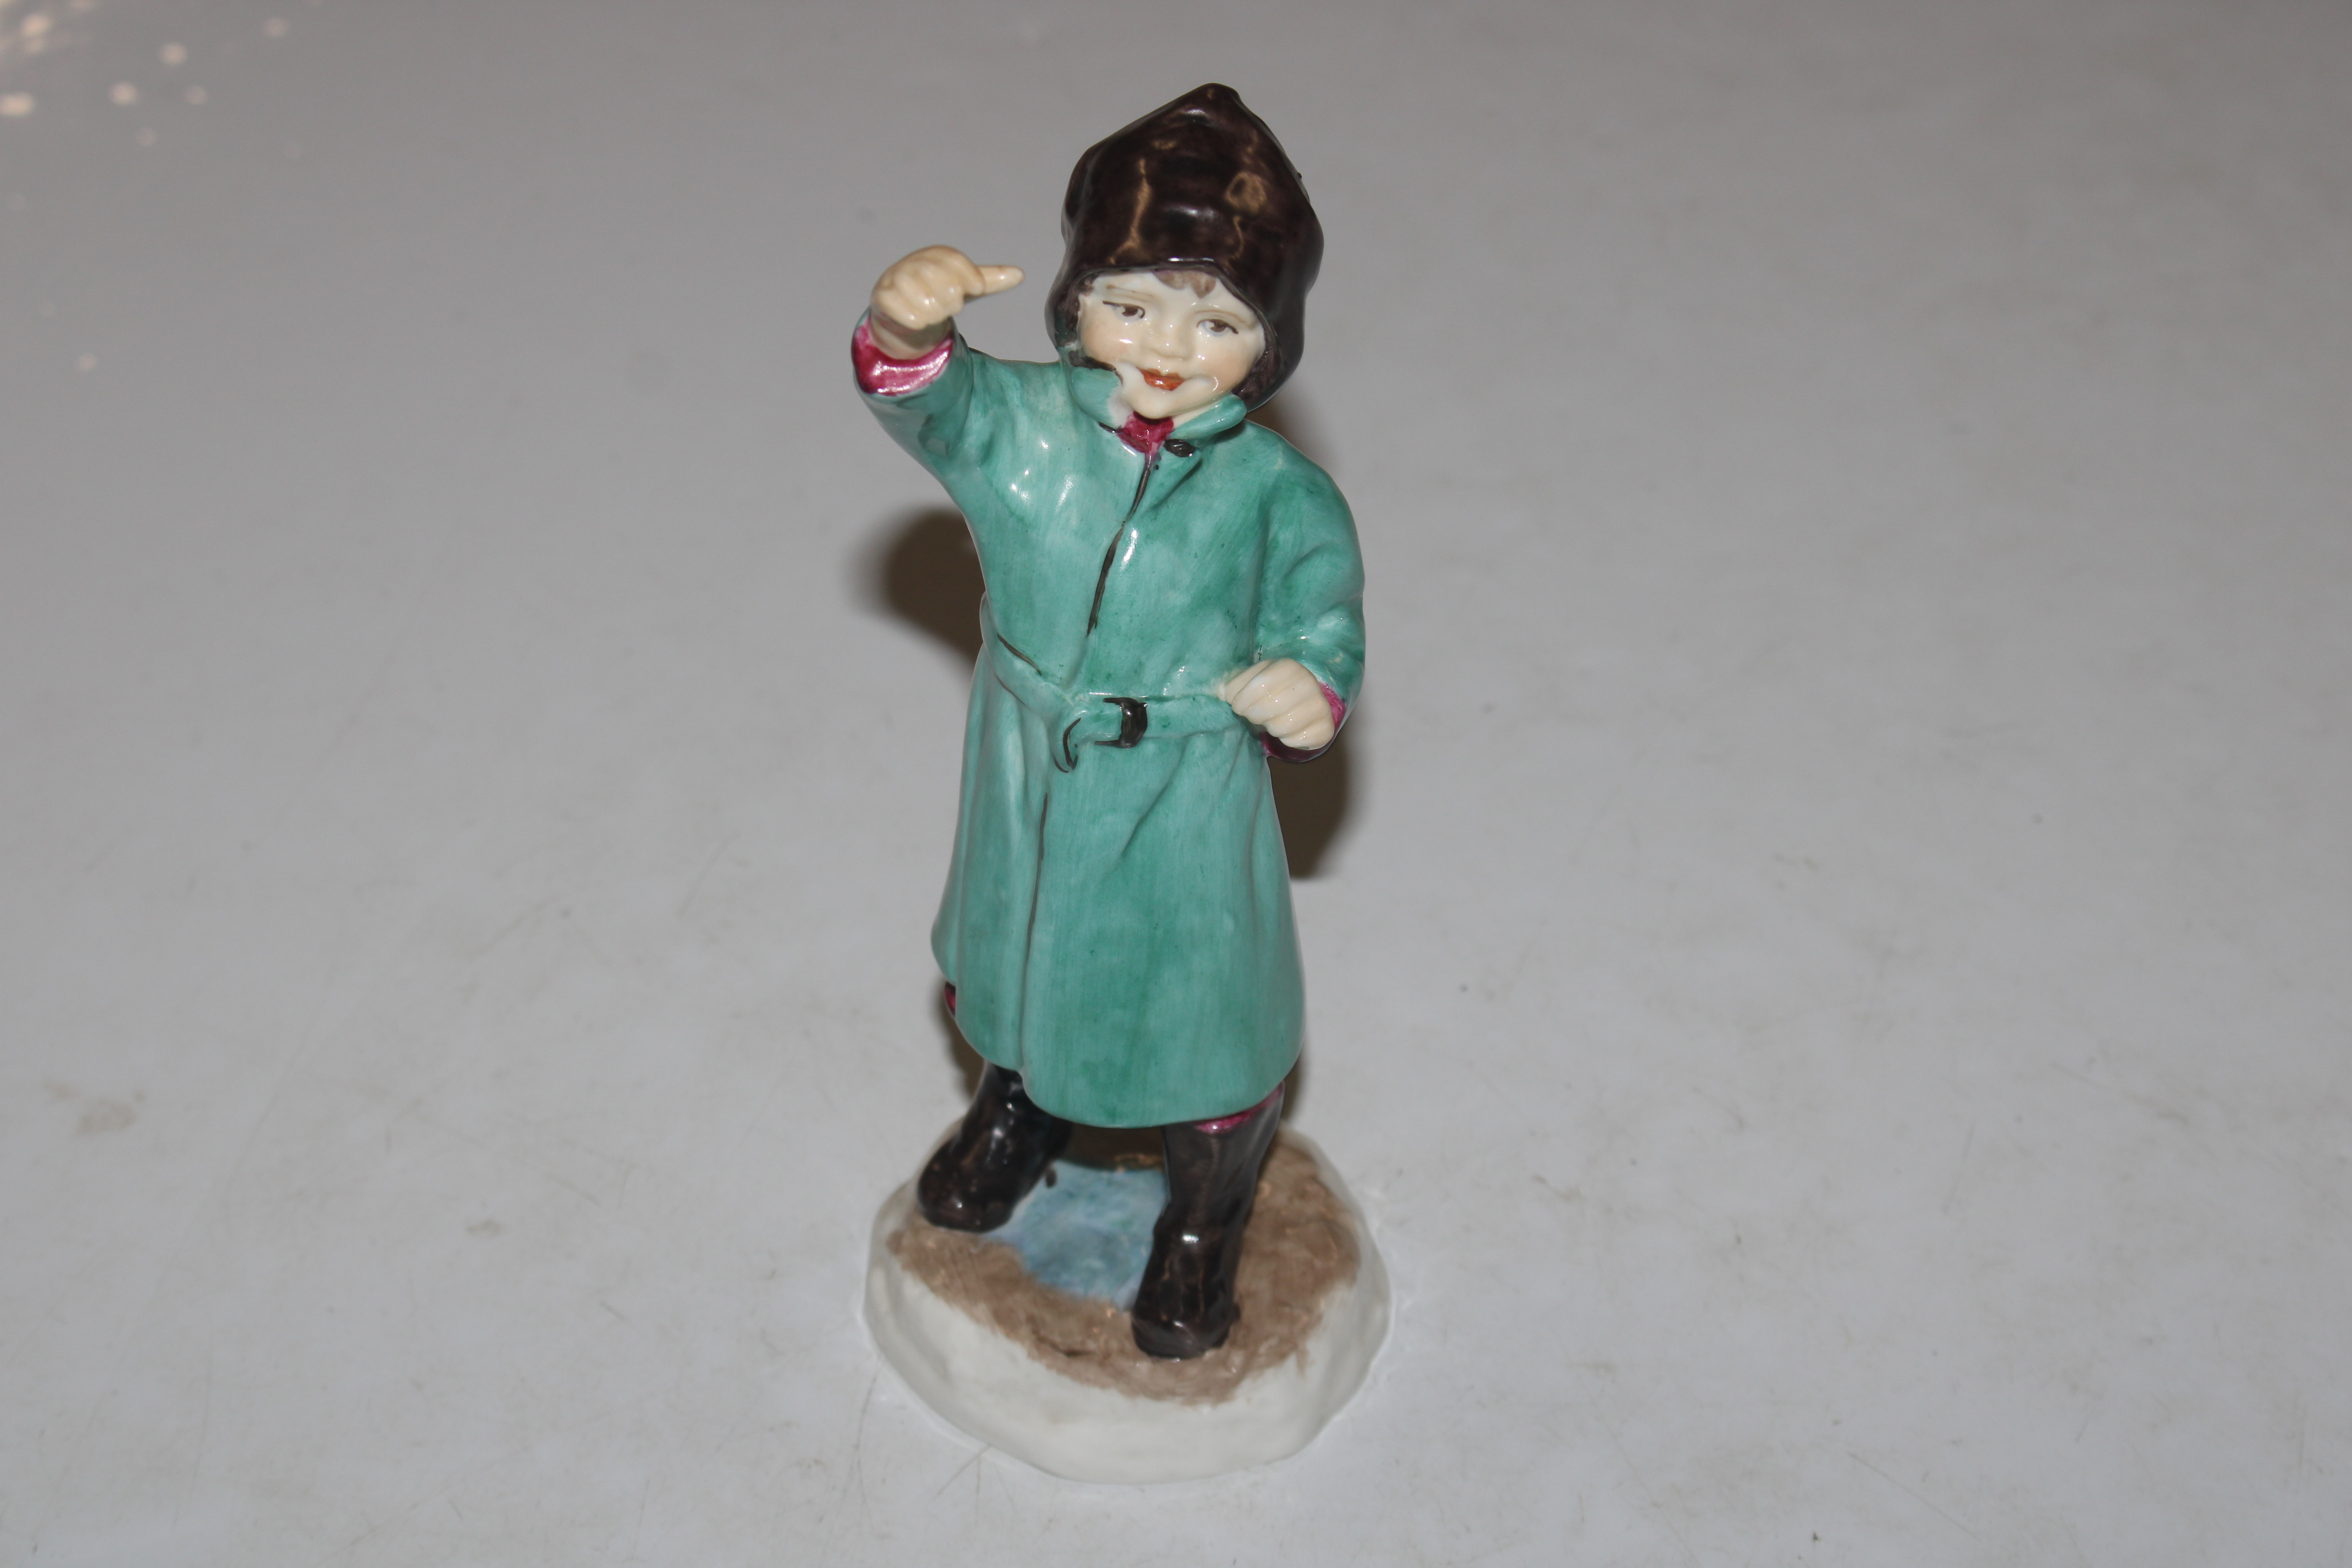 A Royal Worcester figure entitled "February" No. 3